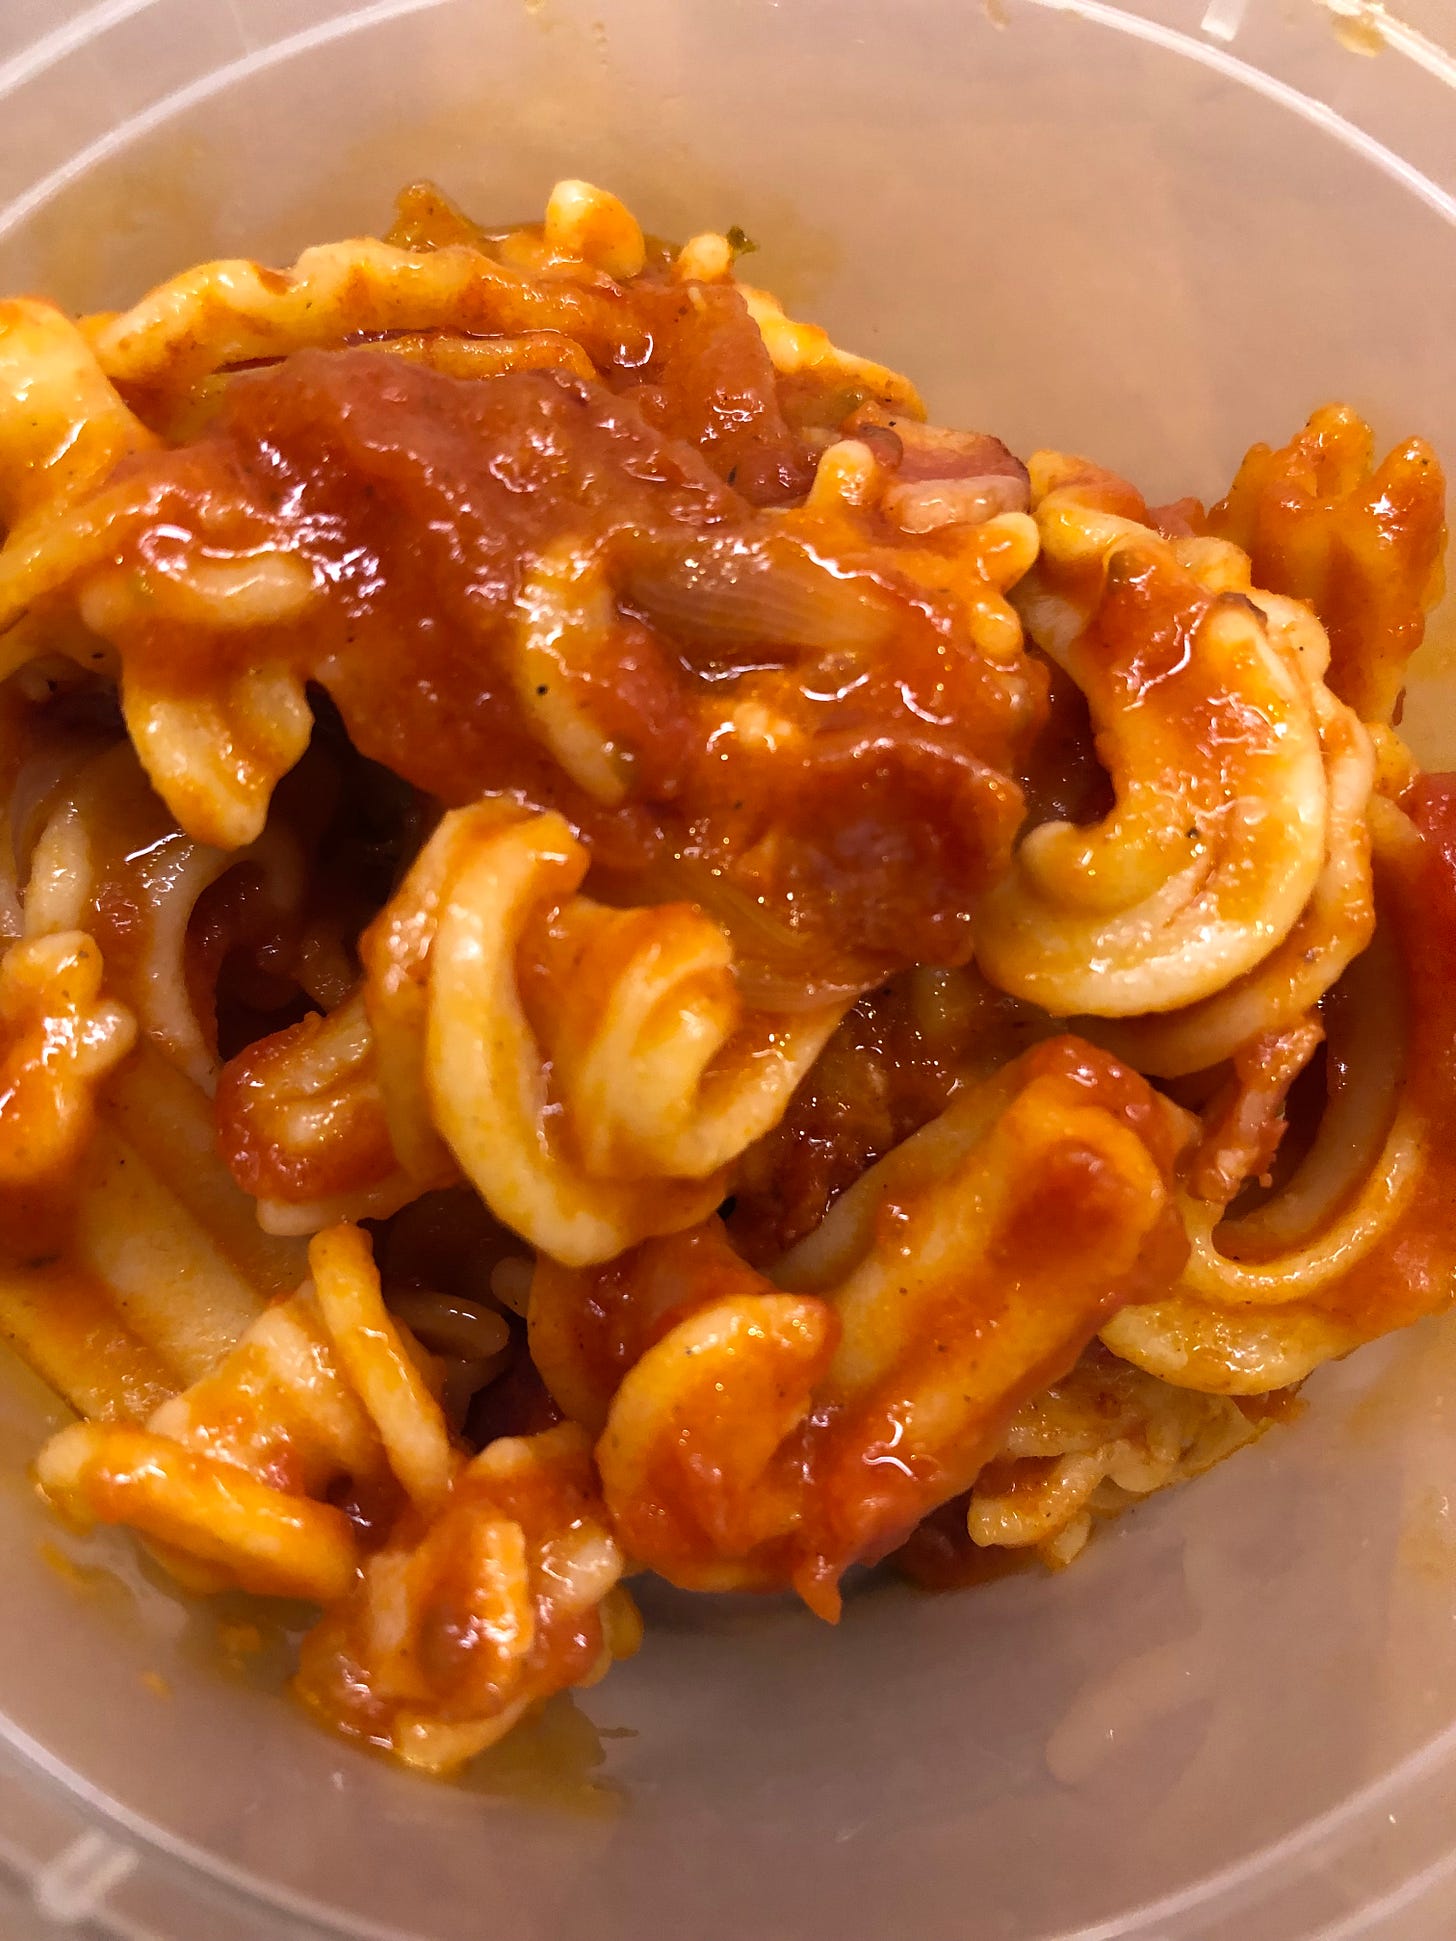 A container full of cascatelli noodles coated in tomato sauce